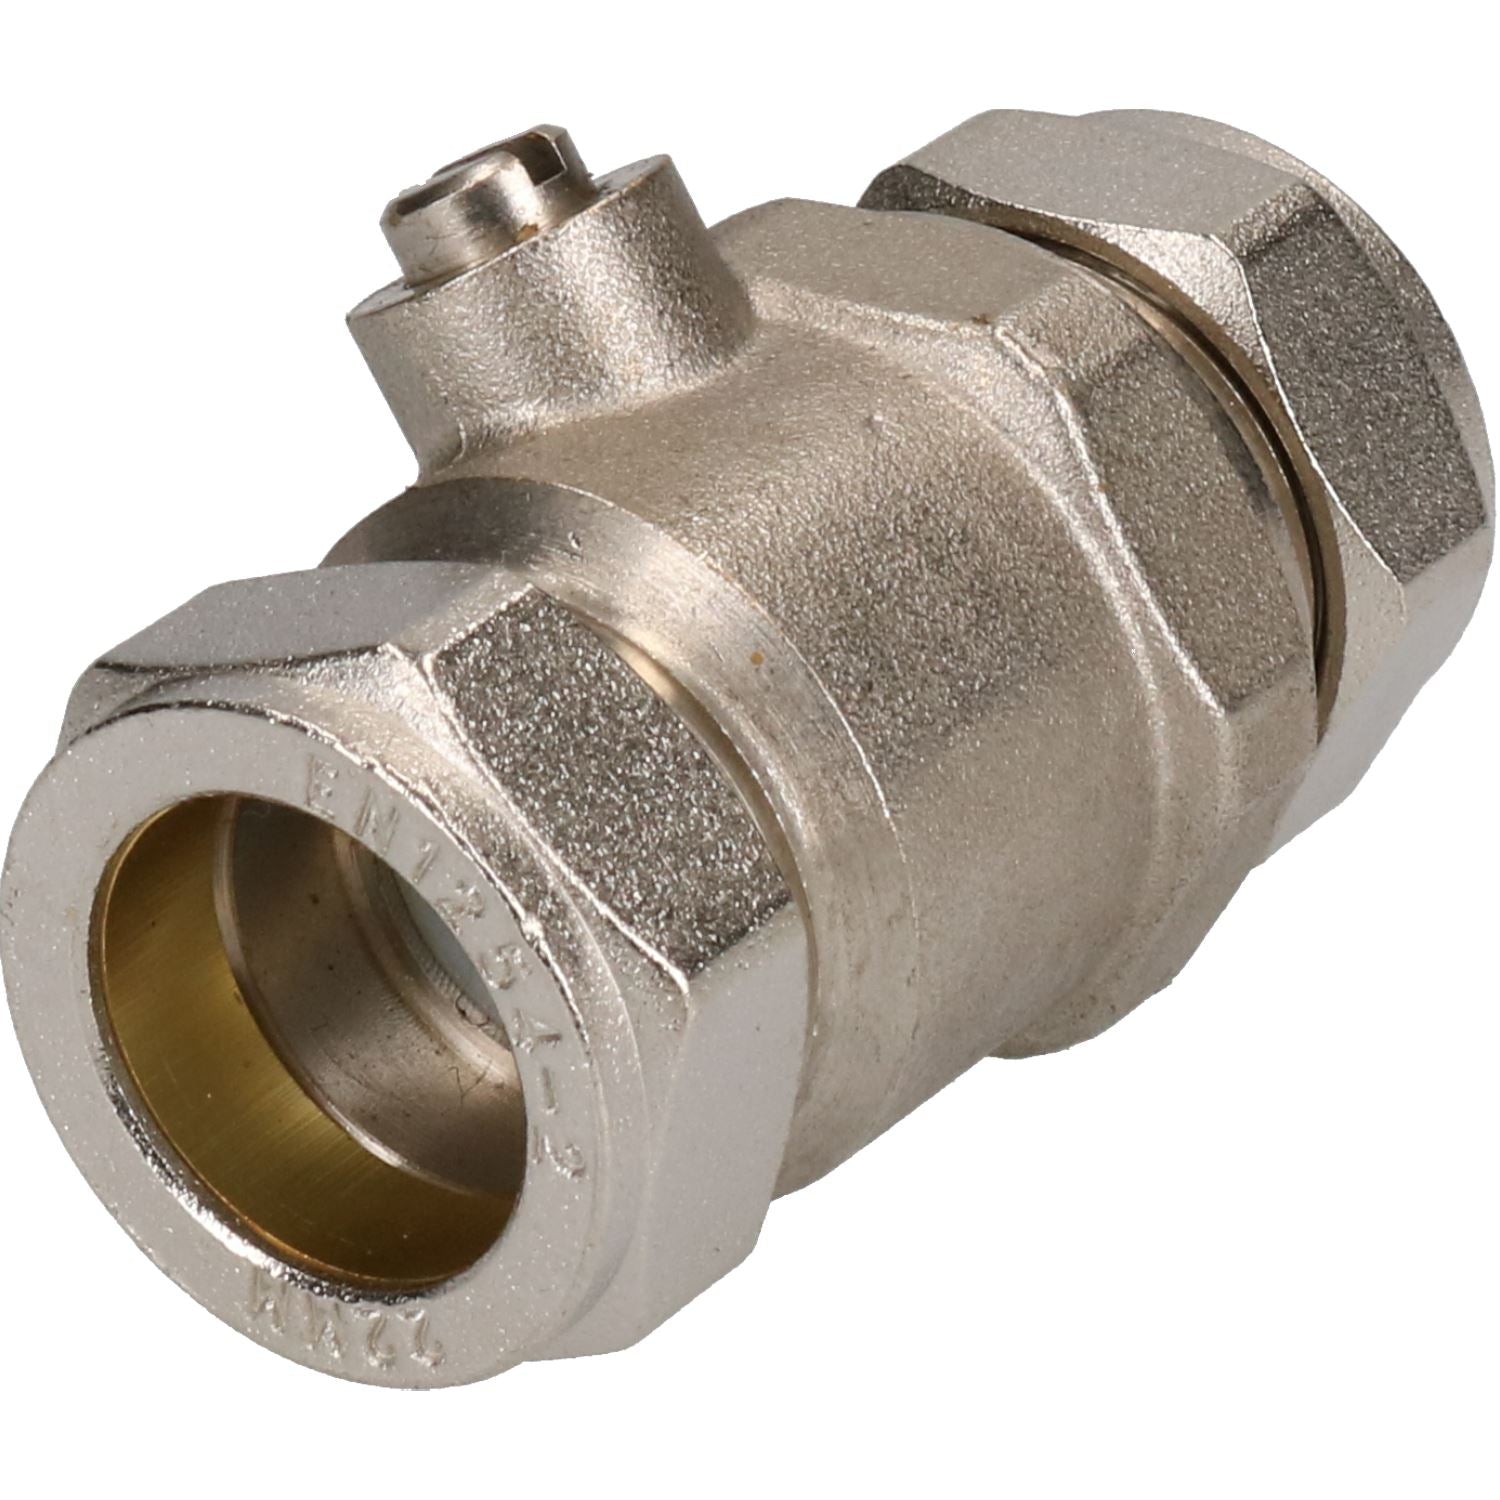 22mm Full Bore Chrome-plated Isolating Valve Hot or Cold Systems for Copper Pipe